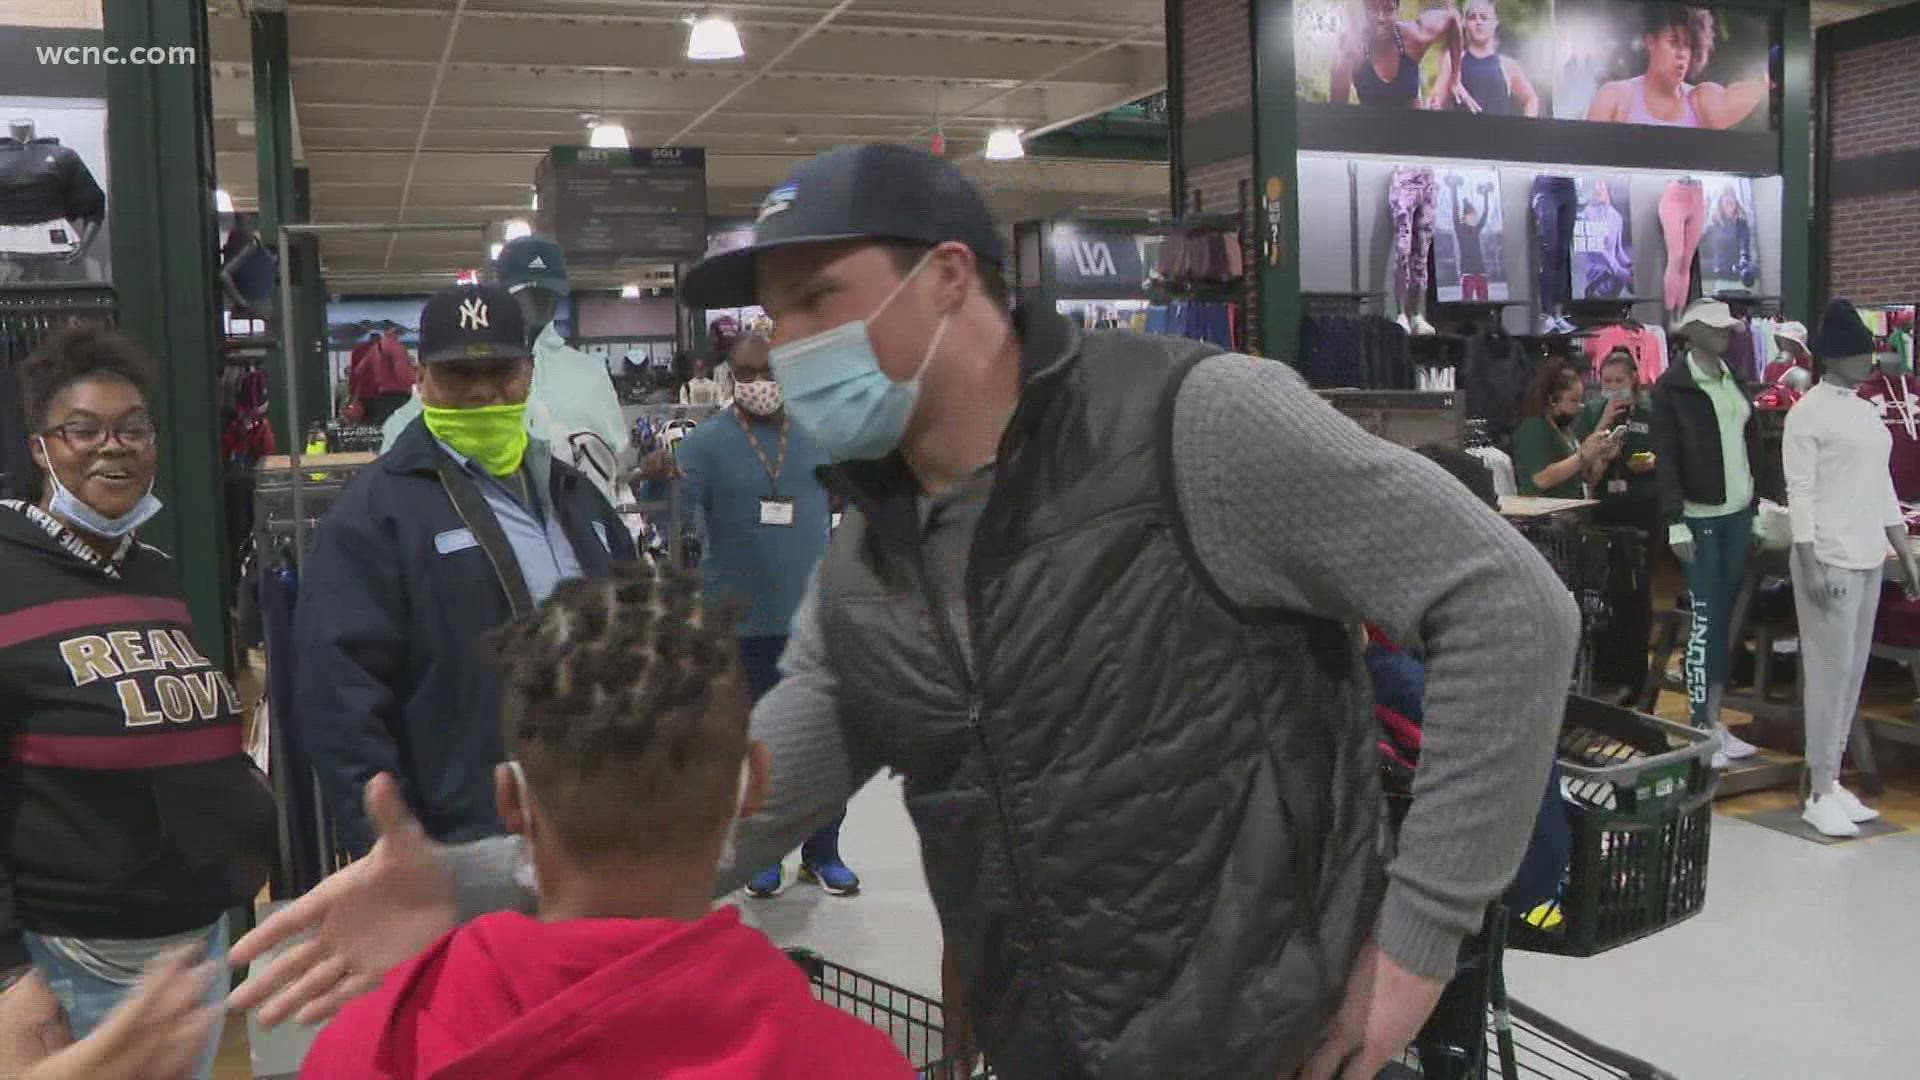 Luke Kuechly was joined by 15 children from the Charlotte area for a surprise holiday shopping event inside DICK'S Sporting Goods in Pineville.